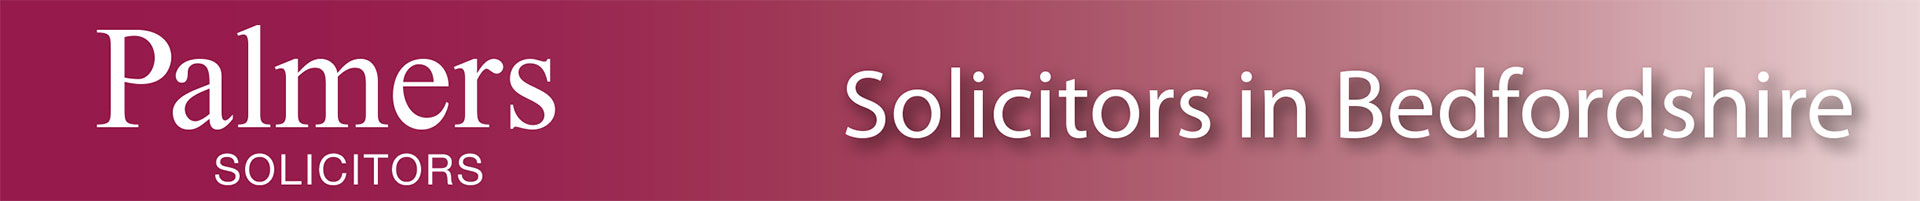 palmers solicitors in Bedfordshire